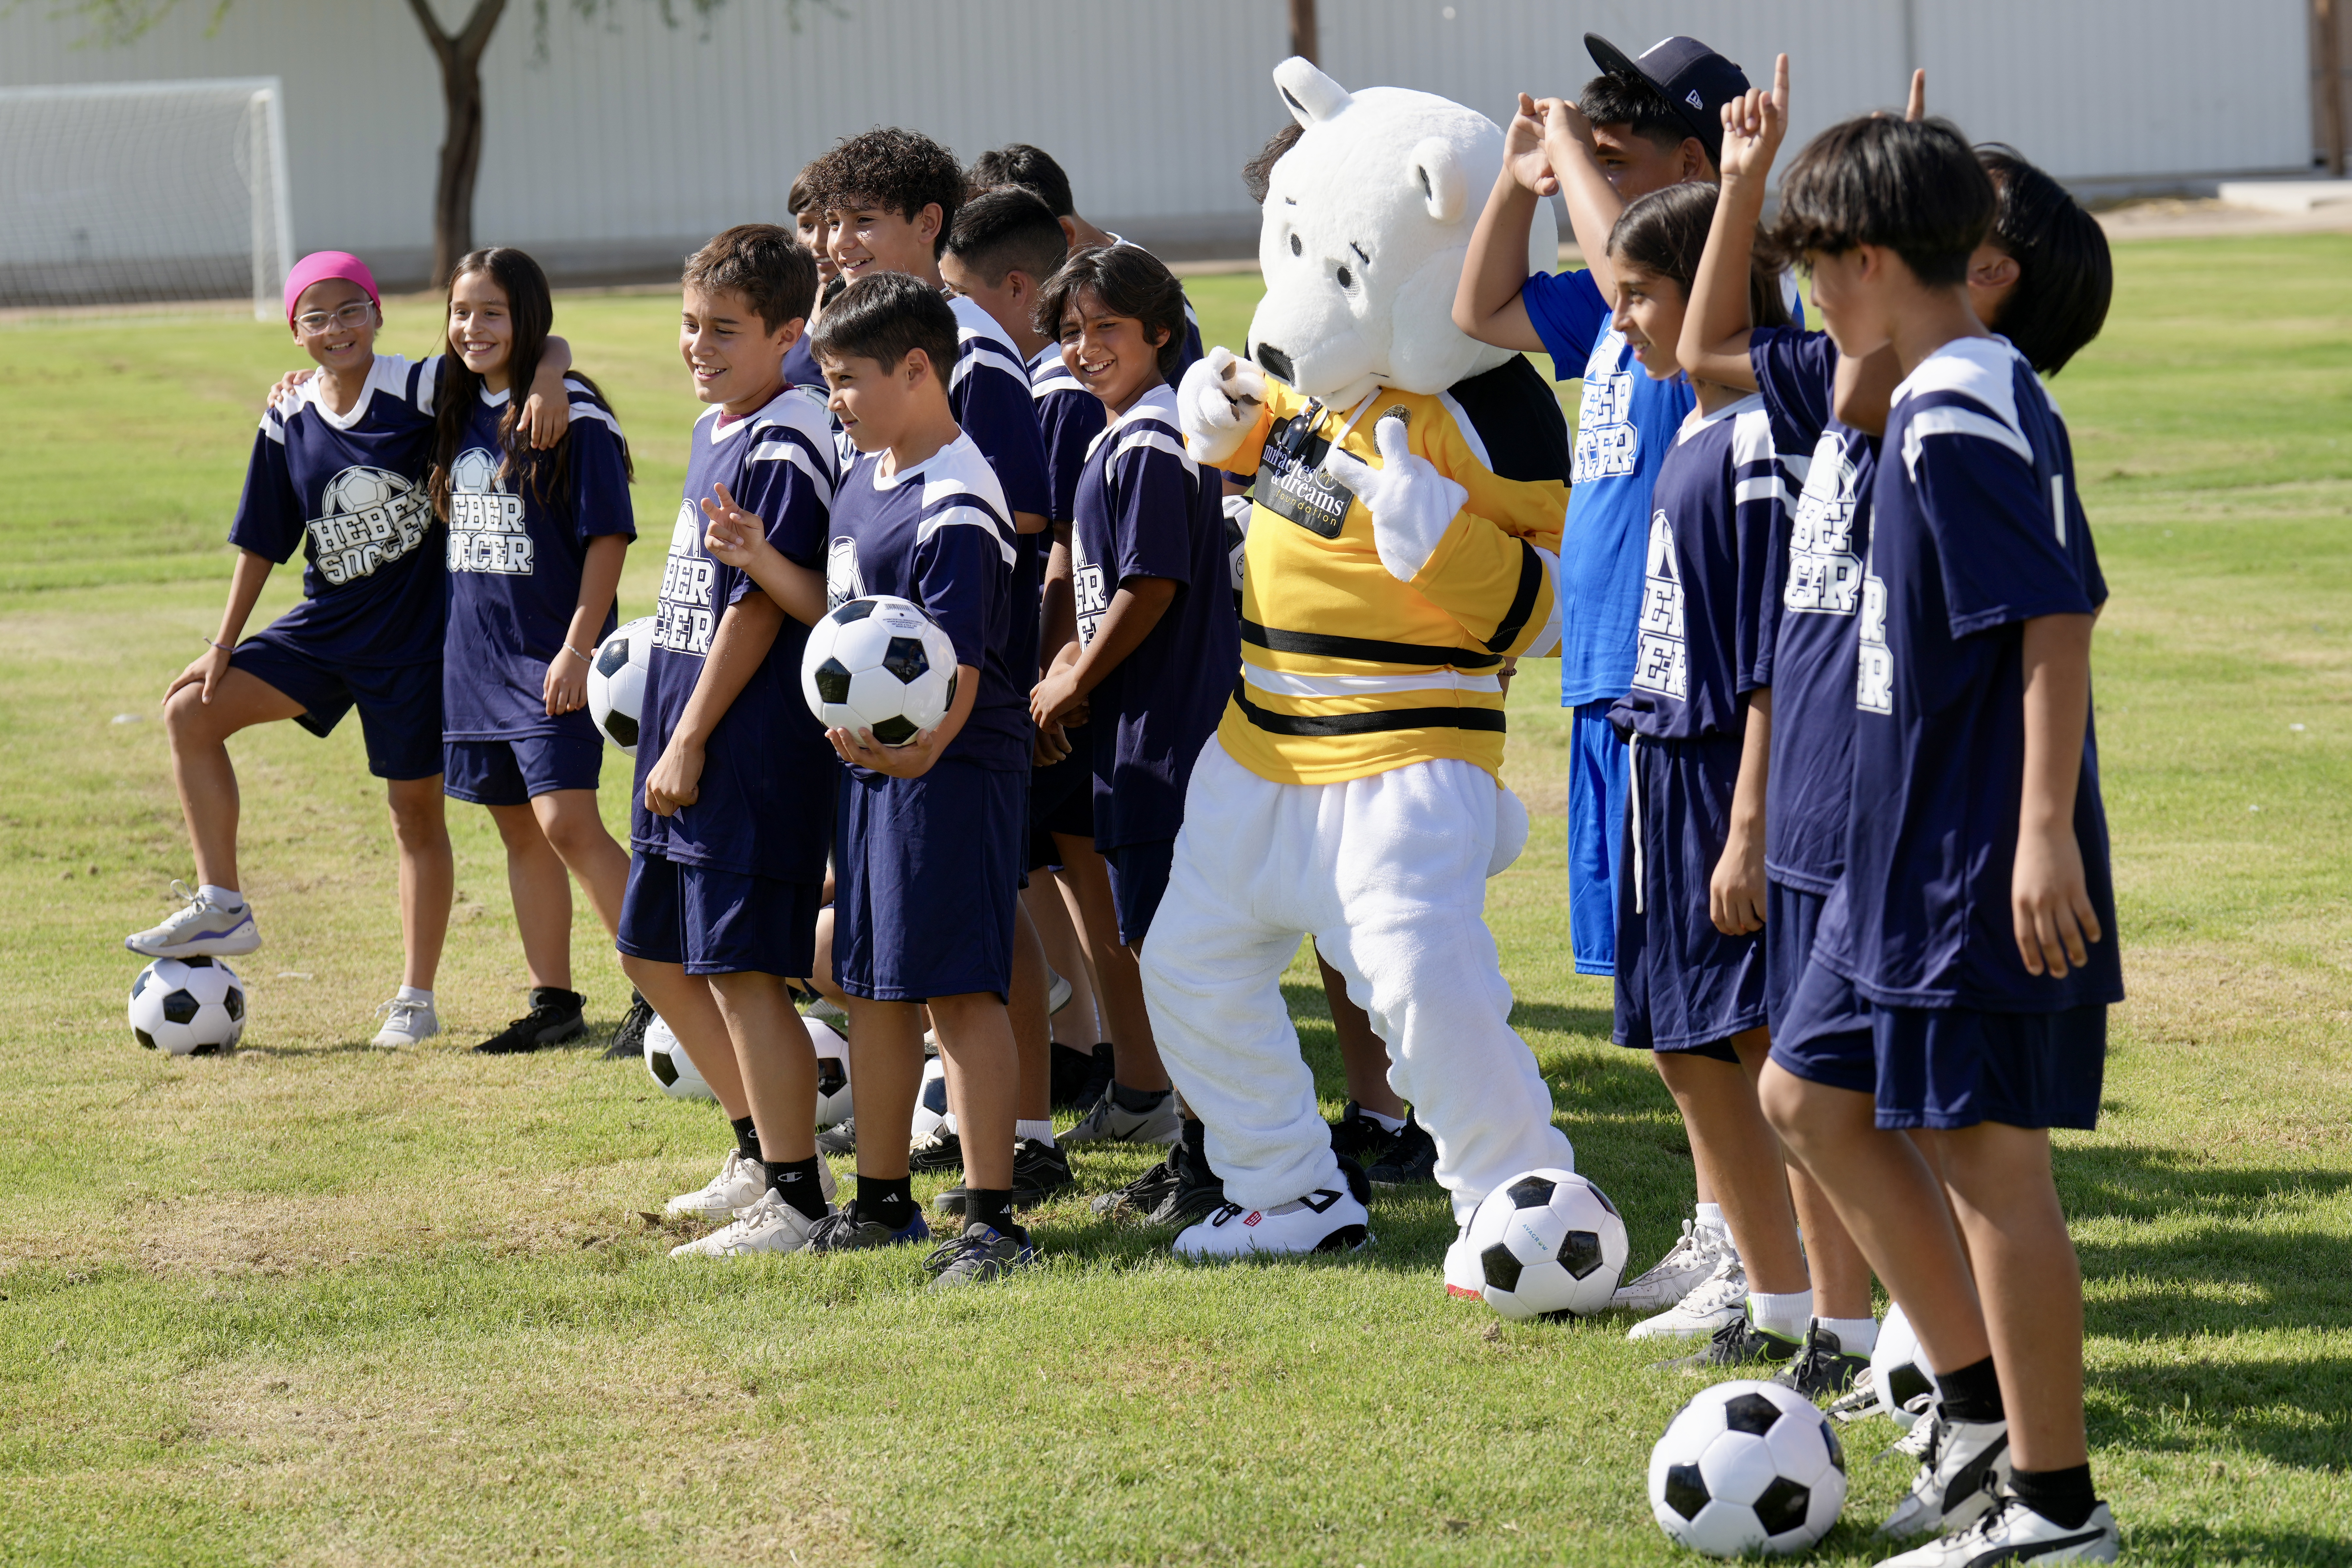 Heber School Soccer Team pictured with the Miracles & Dreams Foundation bear mascot